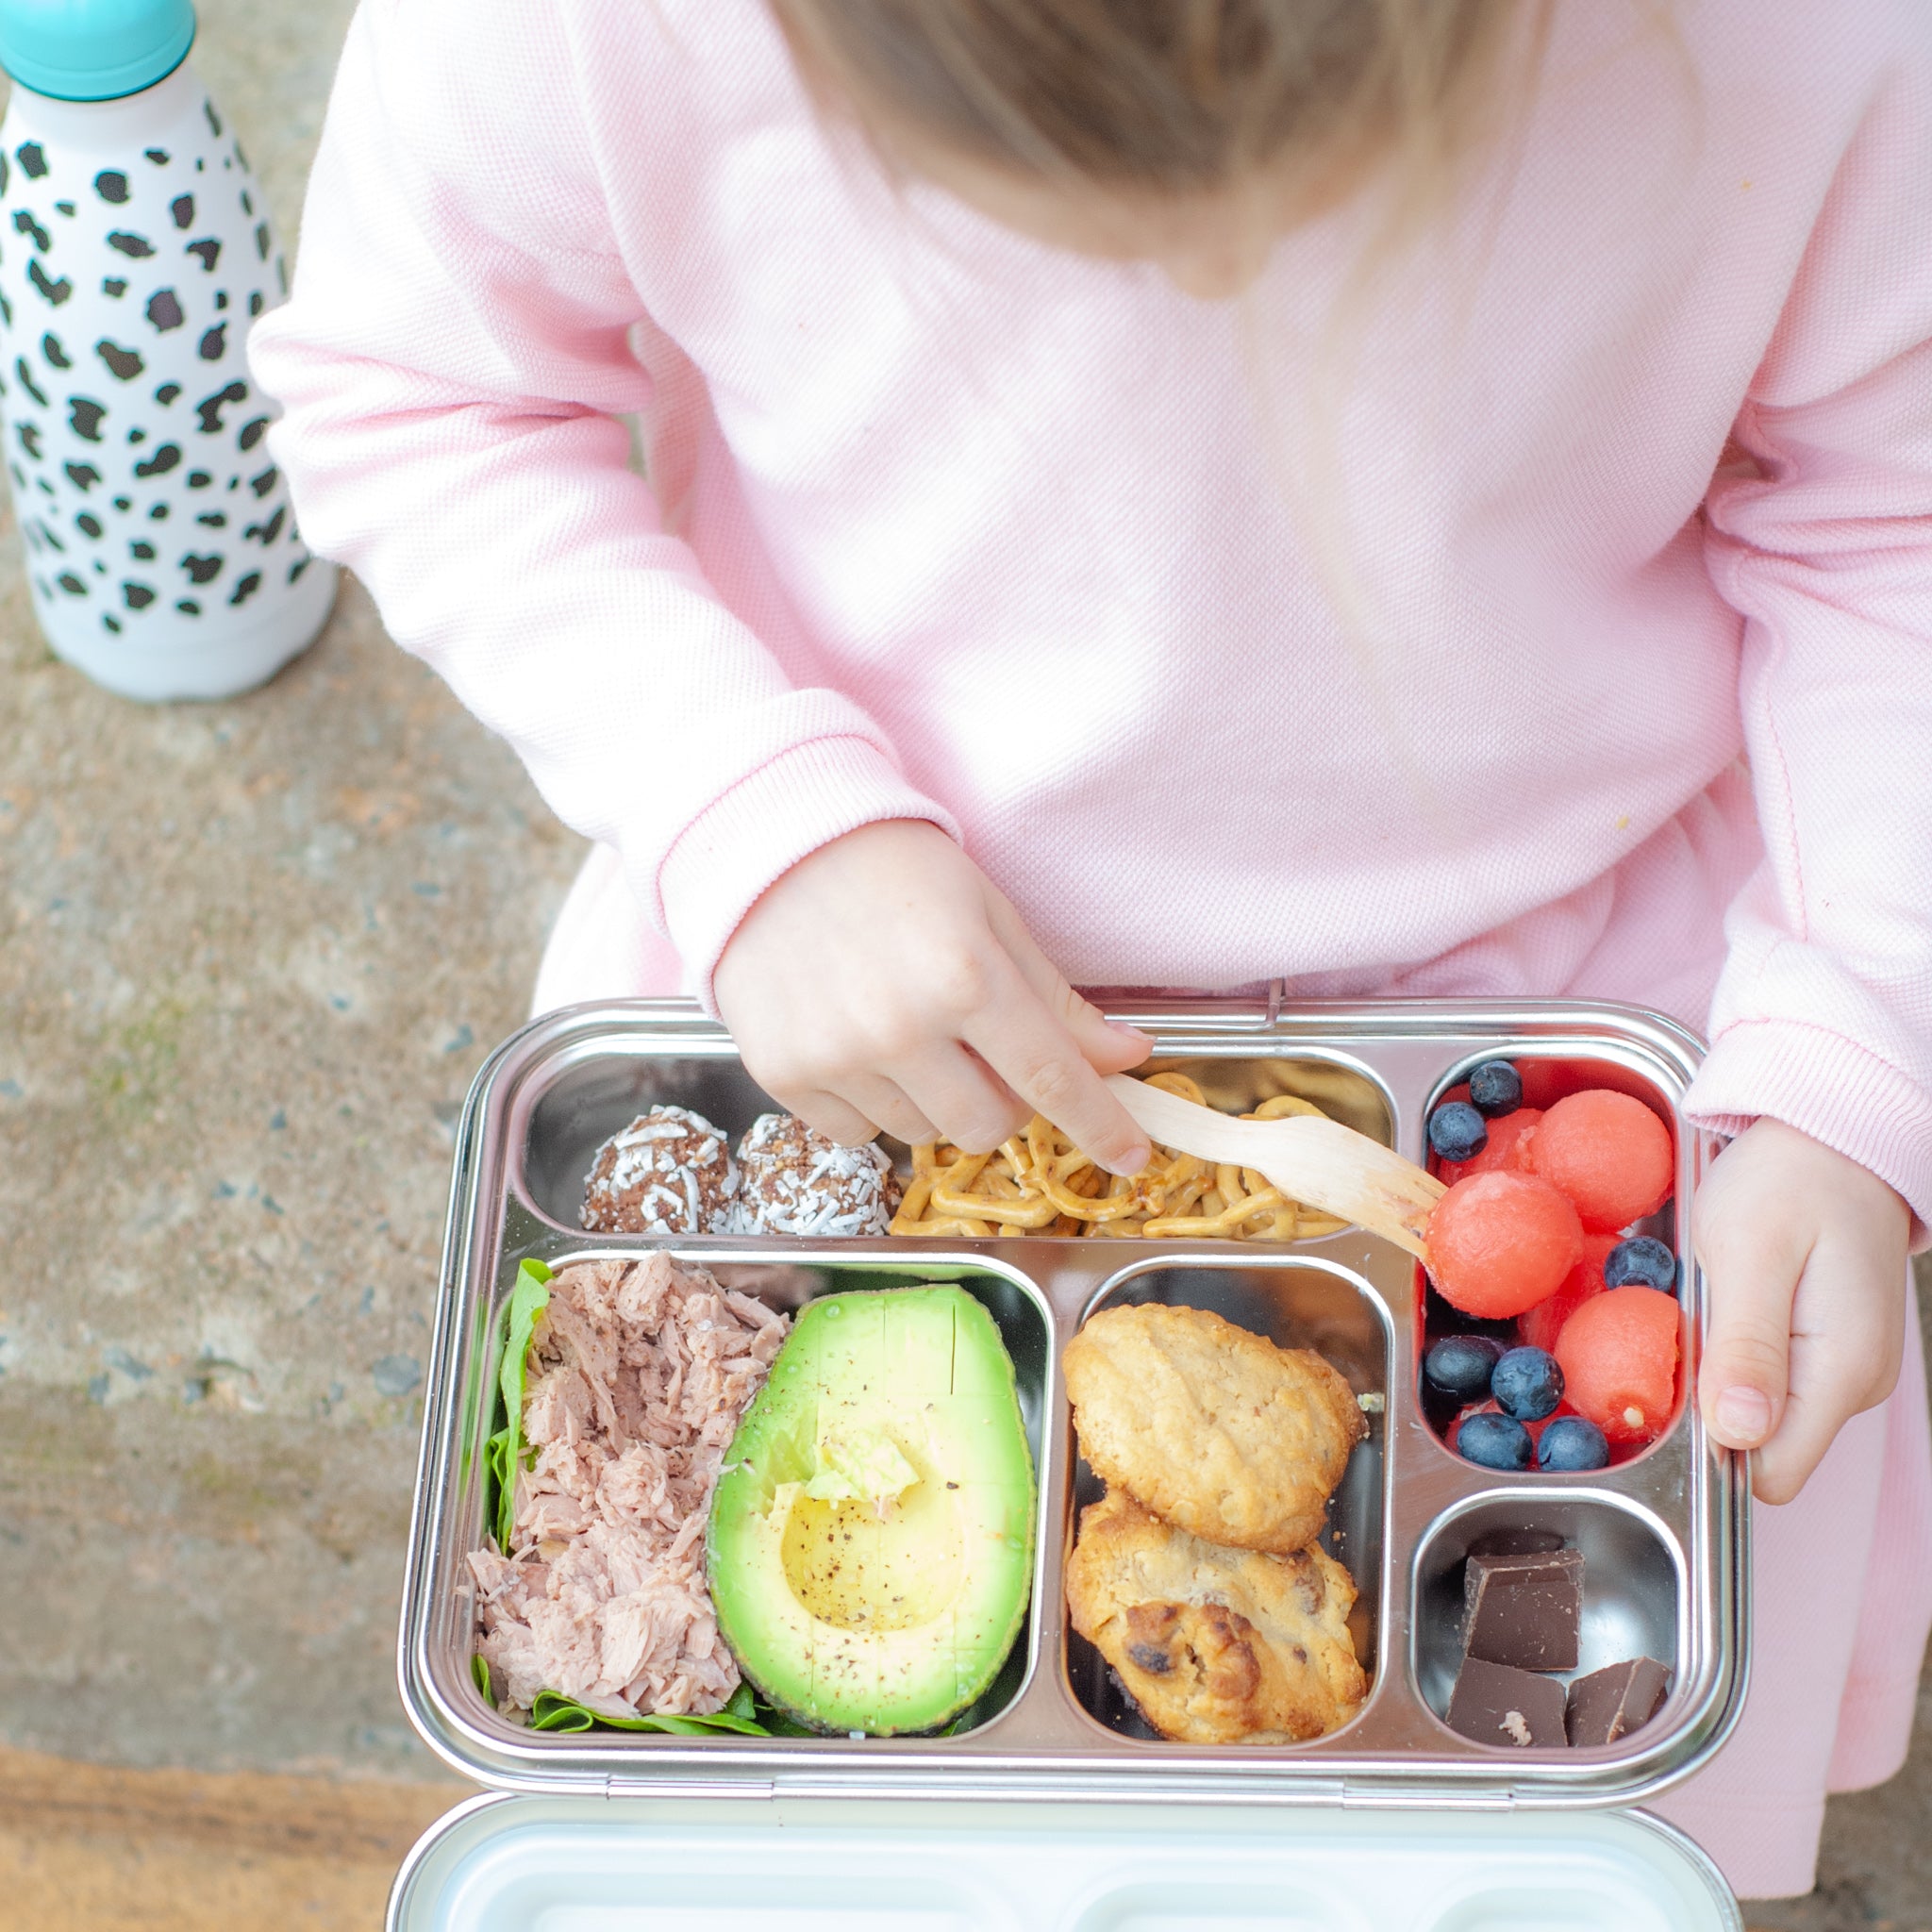 Omiebox Smarter Bento Box - Waste Free Lunch Kits That Fit 